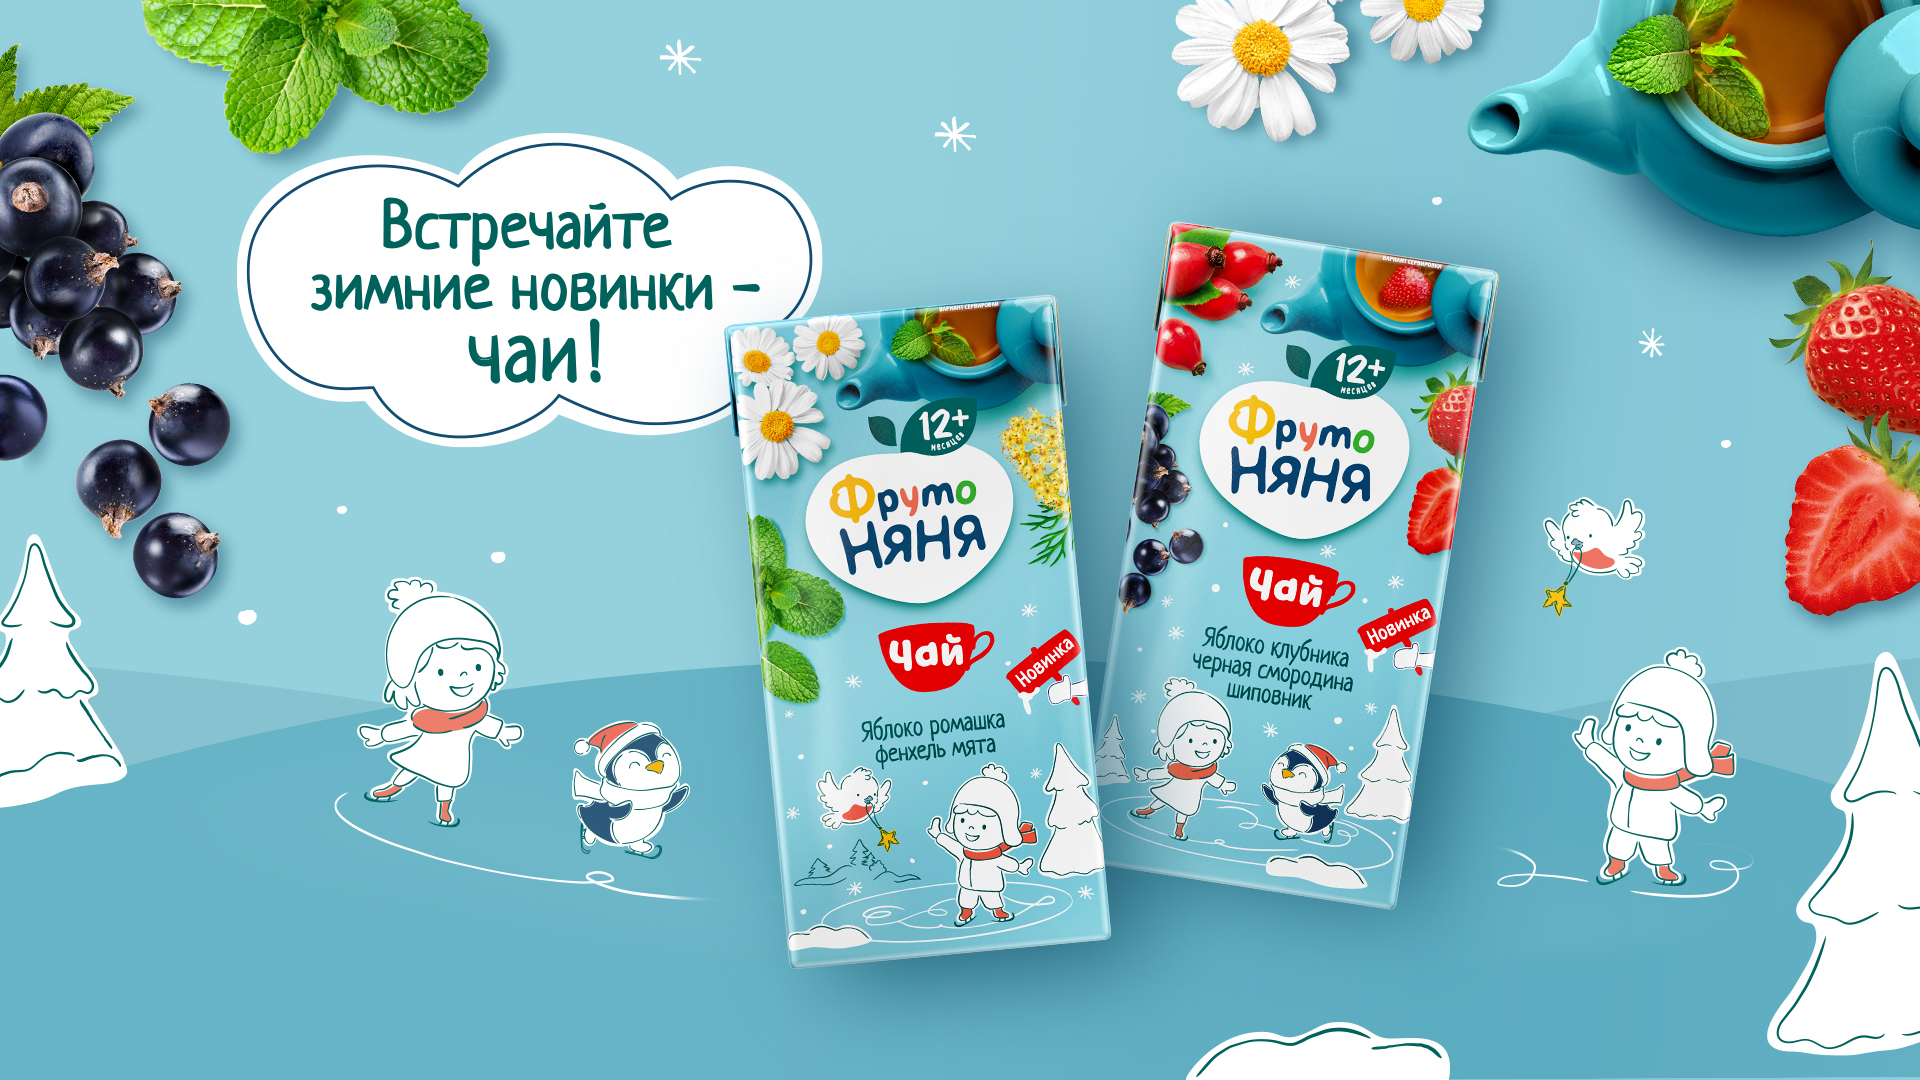 Let’s Welcome Winter Together with FrutoNanny Fragrant Tea